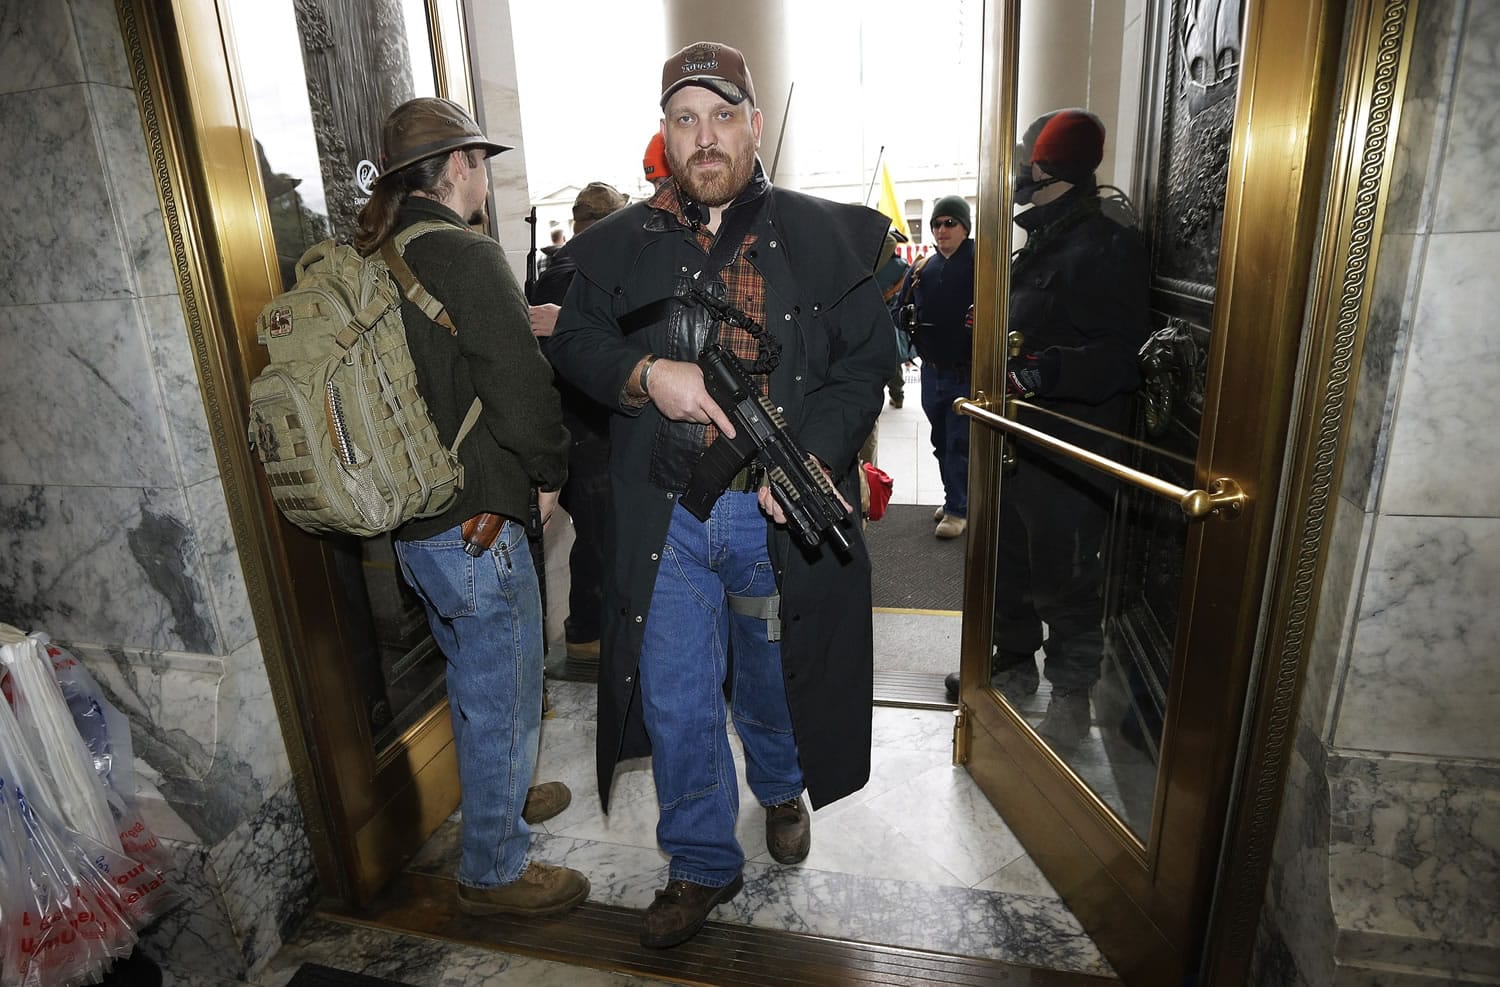 Jason McMillon carries his Rock River LAR-PDS pistol with a 45-round magazine into the Legislative Building at the Capitol in Olympia, Wash., Thursday, Jan. 15, 2015, during a gun-rights rally opposing the state's Initiative 594, which requires - with only a few exceptions - background checks on all gun sales and transfers. Rules at the Capitol allow guns to be carried openly in the building. (AP Photo/Ted S.